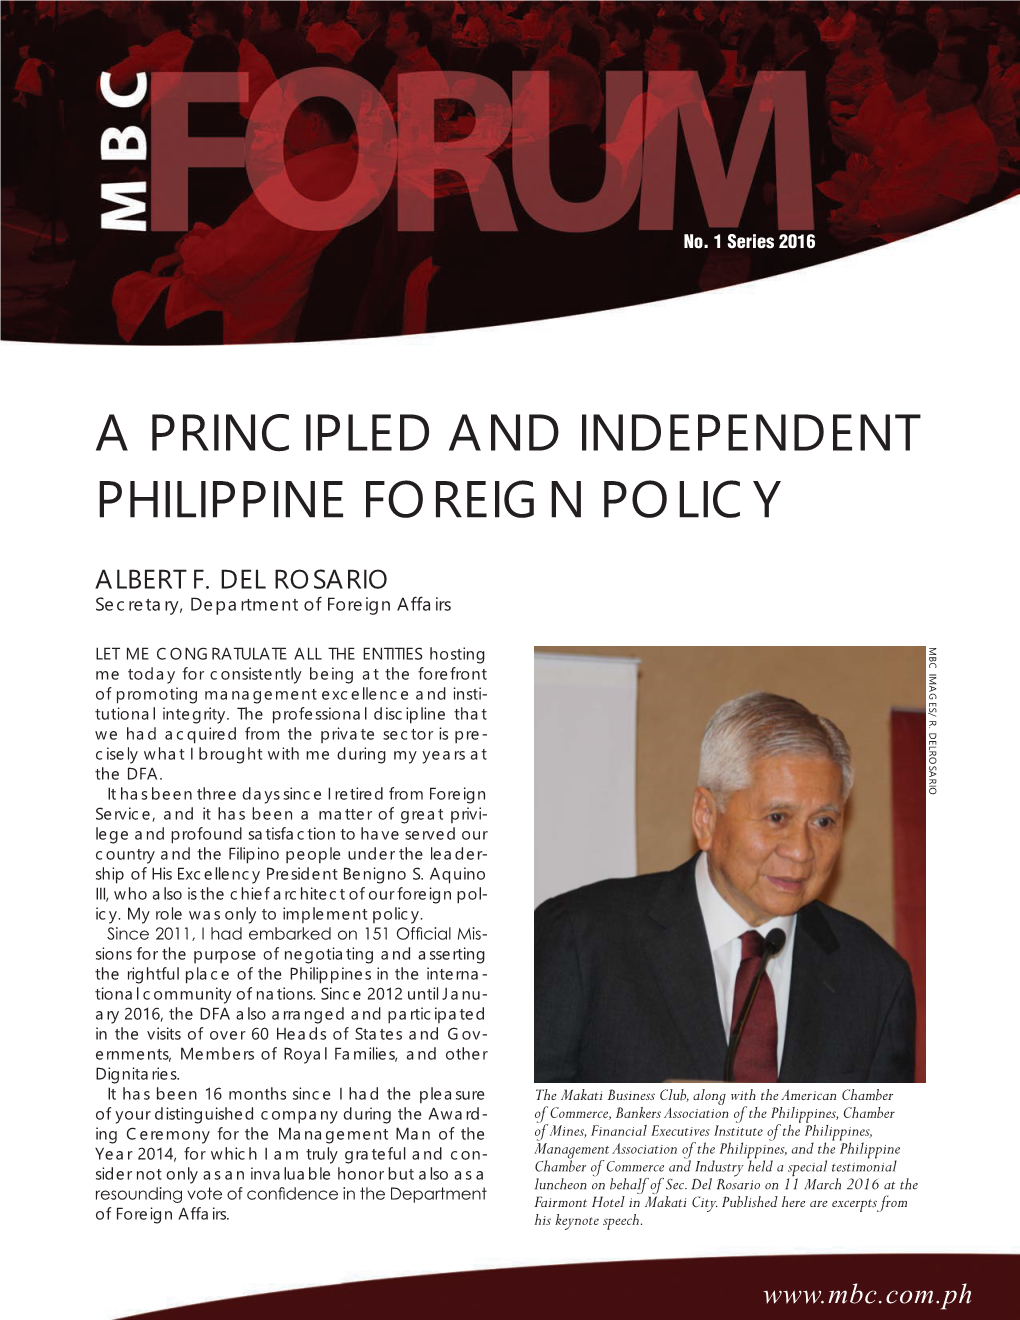 A Principled and Independent Philippine Foreign Policy